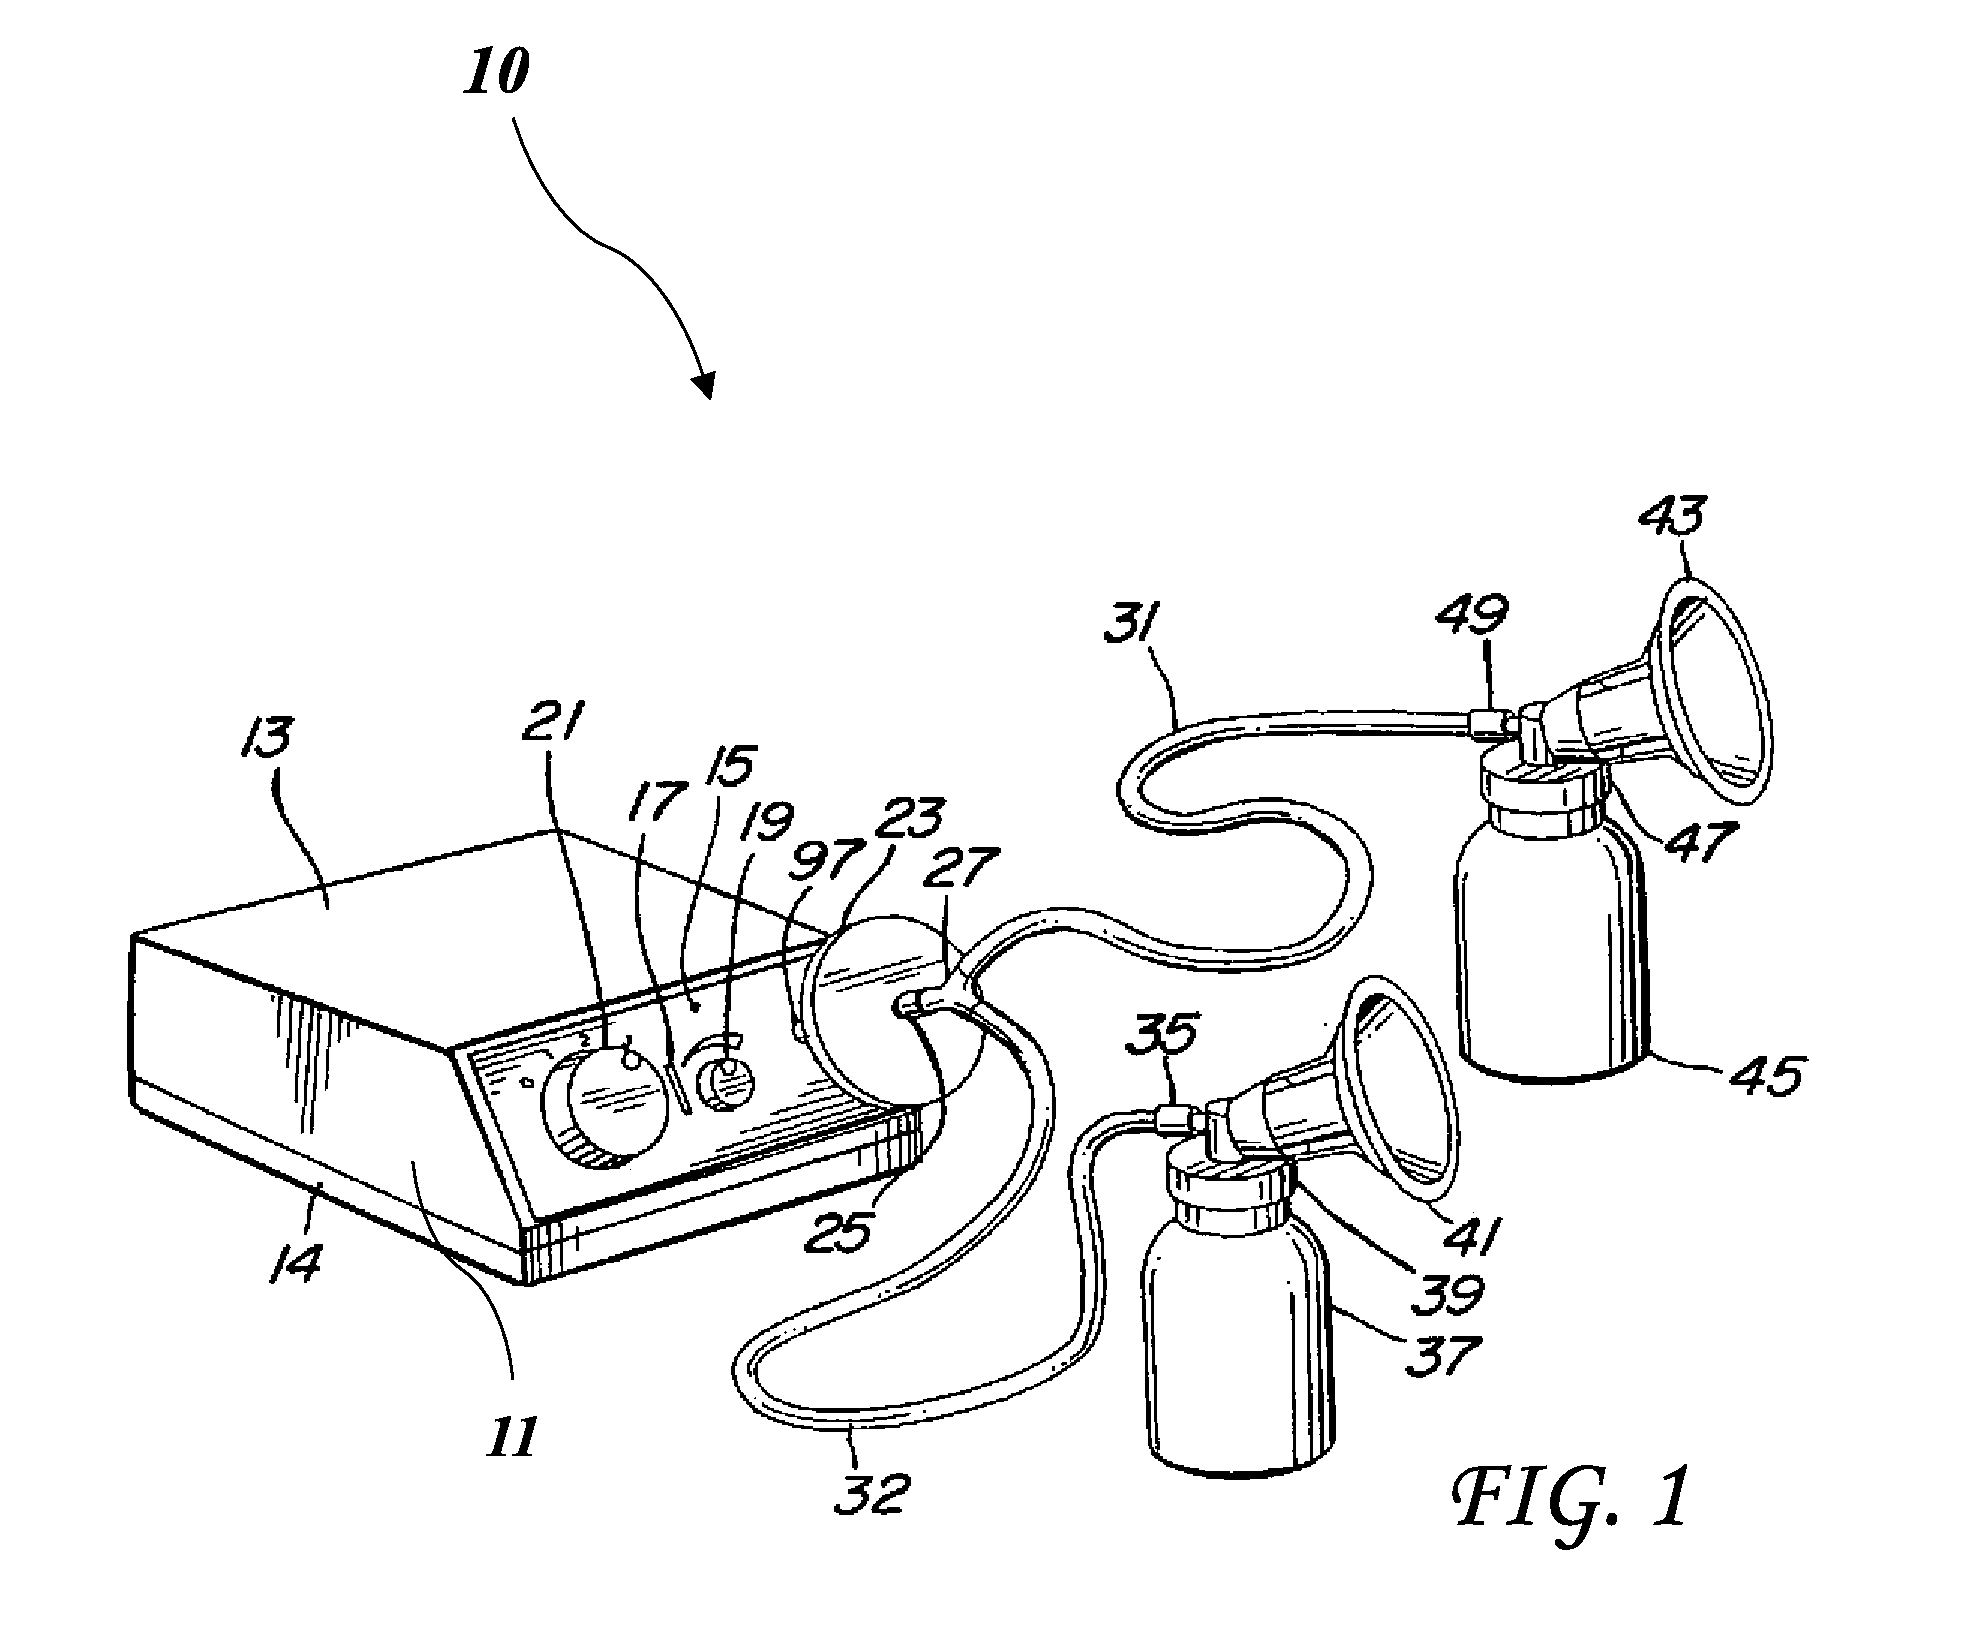 Electrical breast pump and flexible breast cup system